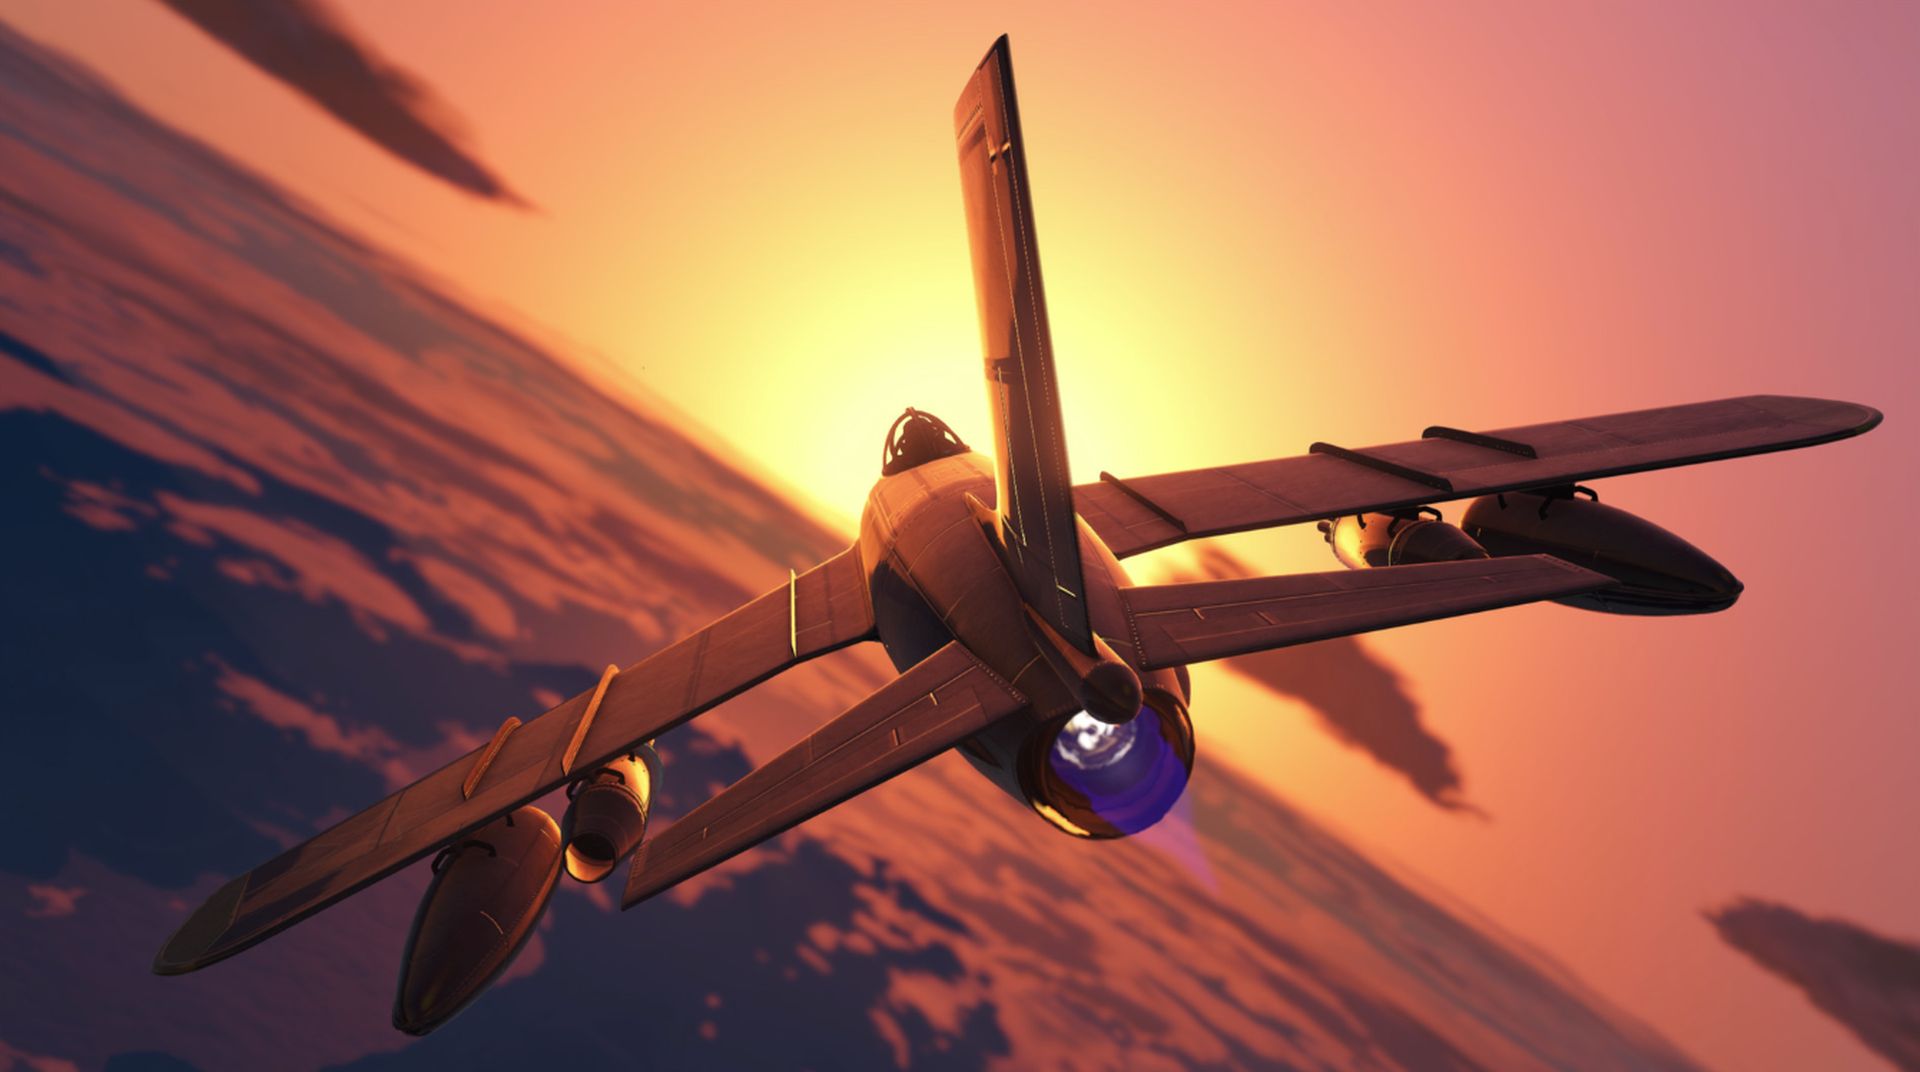 GTA 5 source code leak: What you need to know